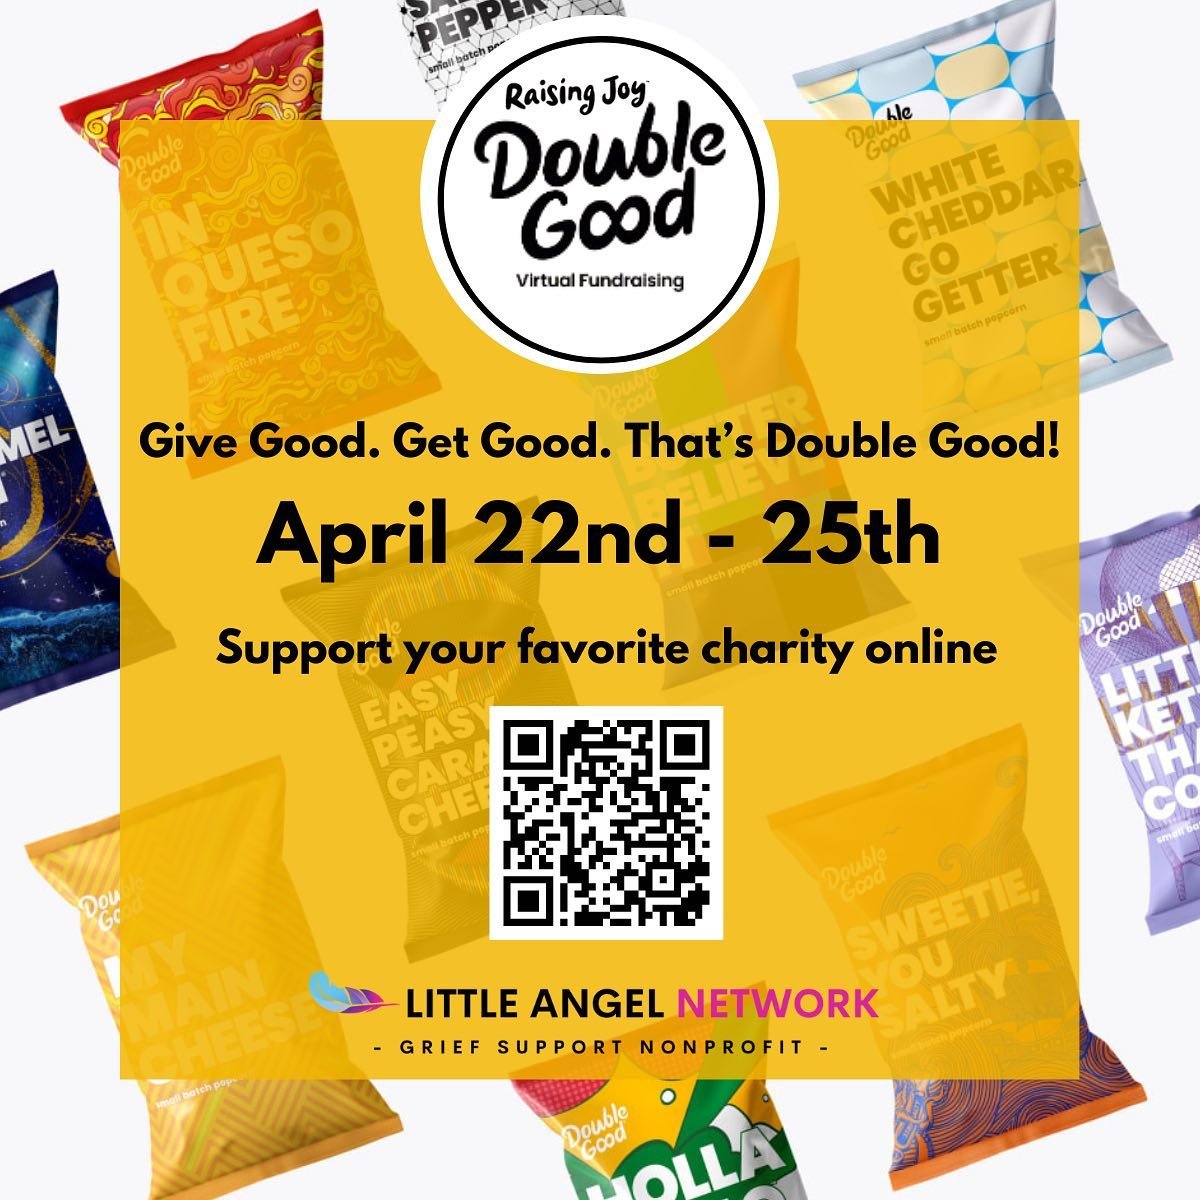 🍿 Join us for a poppin&rsquo; good time and make a difference!🍿

Our virtual fundraiser is here, featuring Double Good gourmet popcorn in delicious flavors like Easy Peasy Caramel Cheesy, Holla-Pe&ntilde;o, It&rsquo;s Peanut Butter Chocolate Time!,